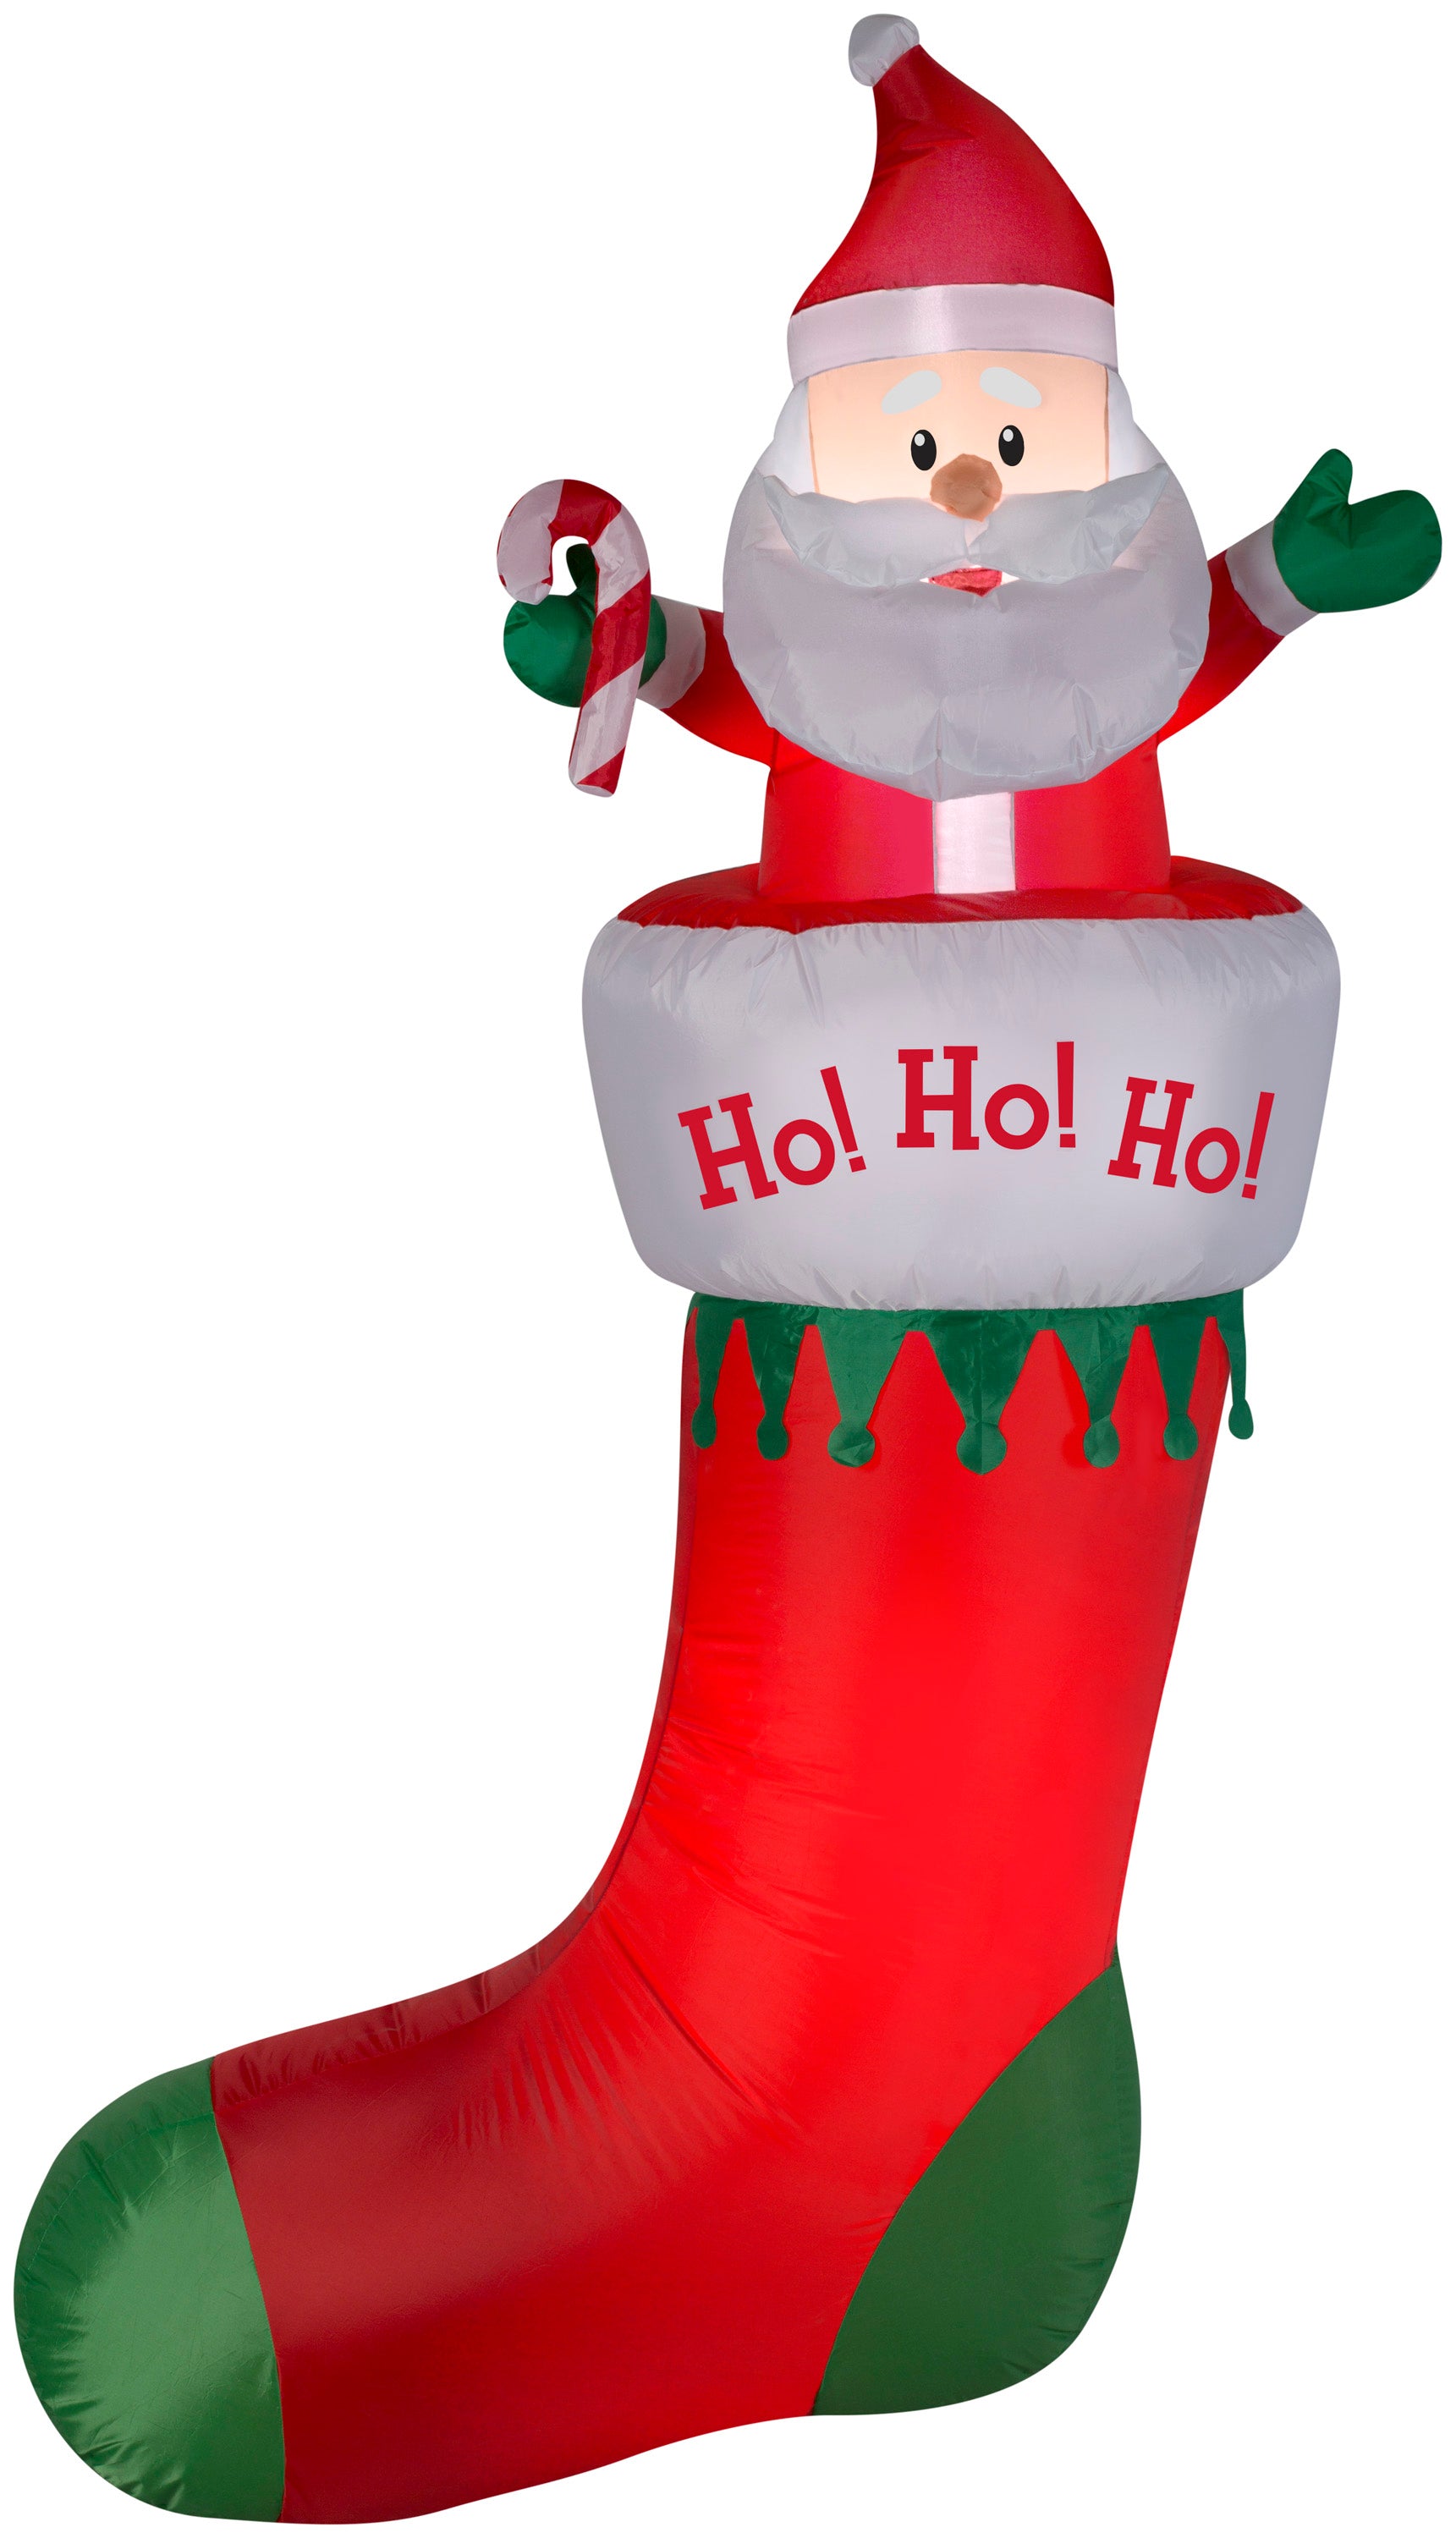 7' Airblown Stocking Hanging From Gutter Christmas Inflatable